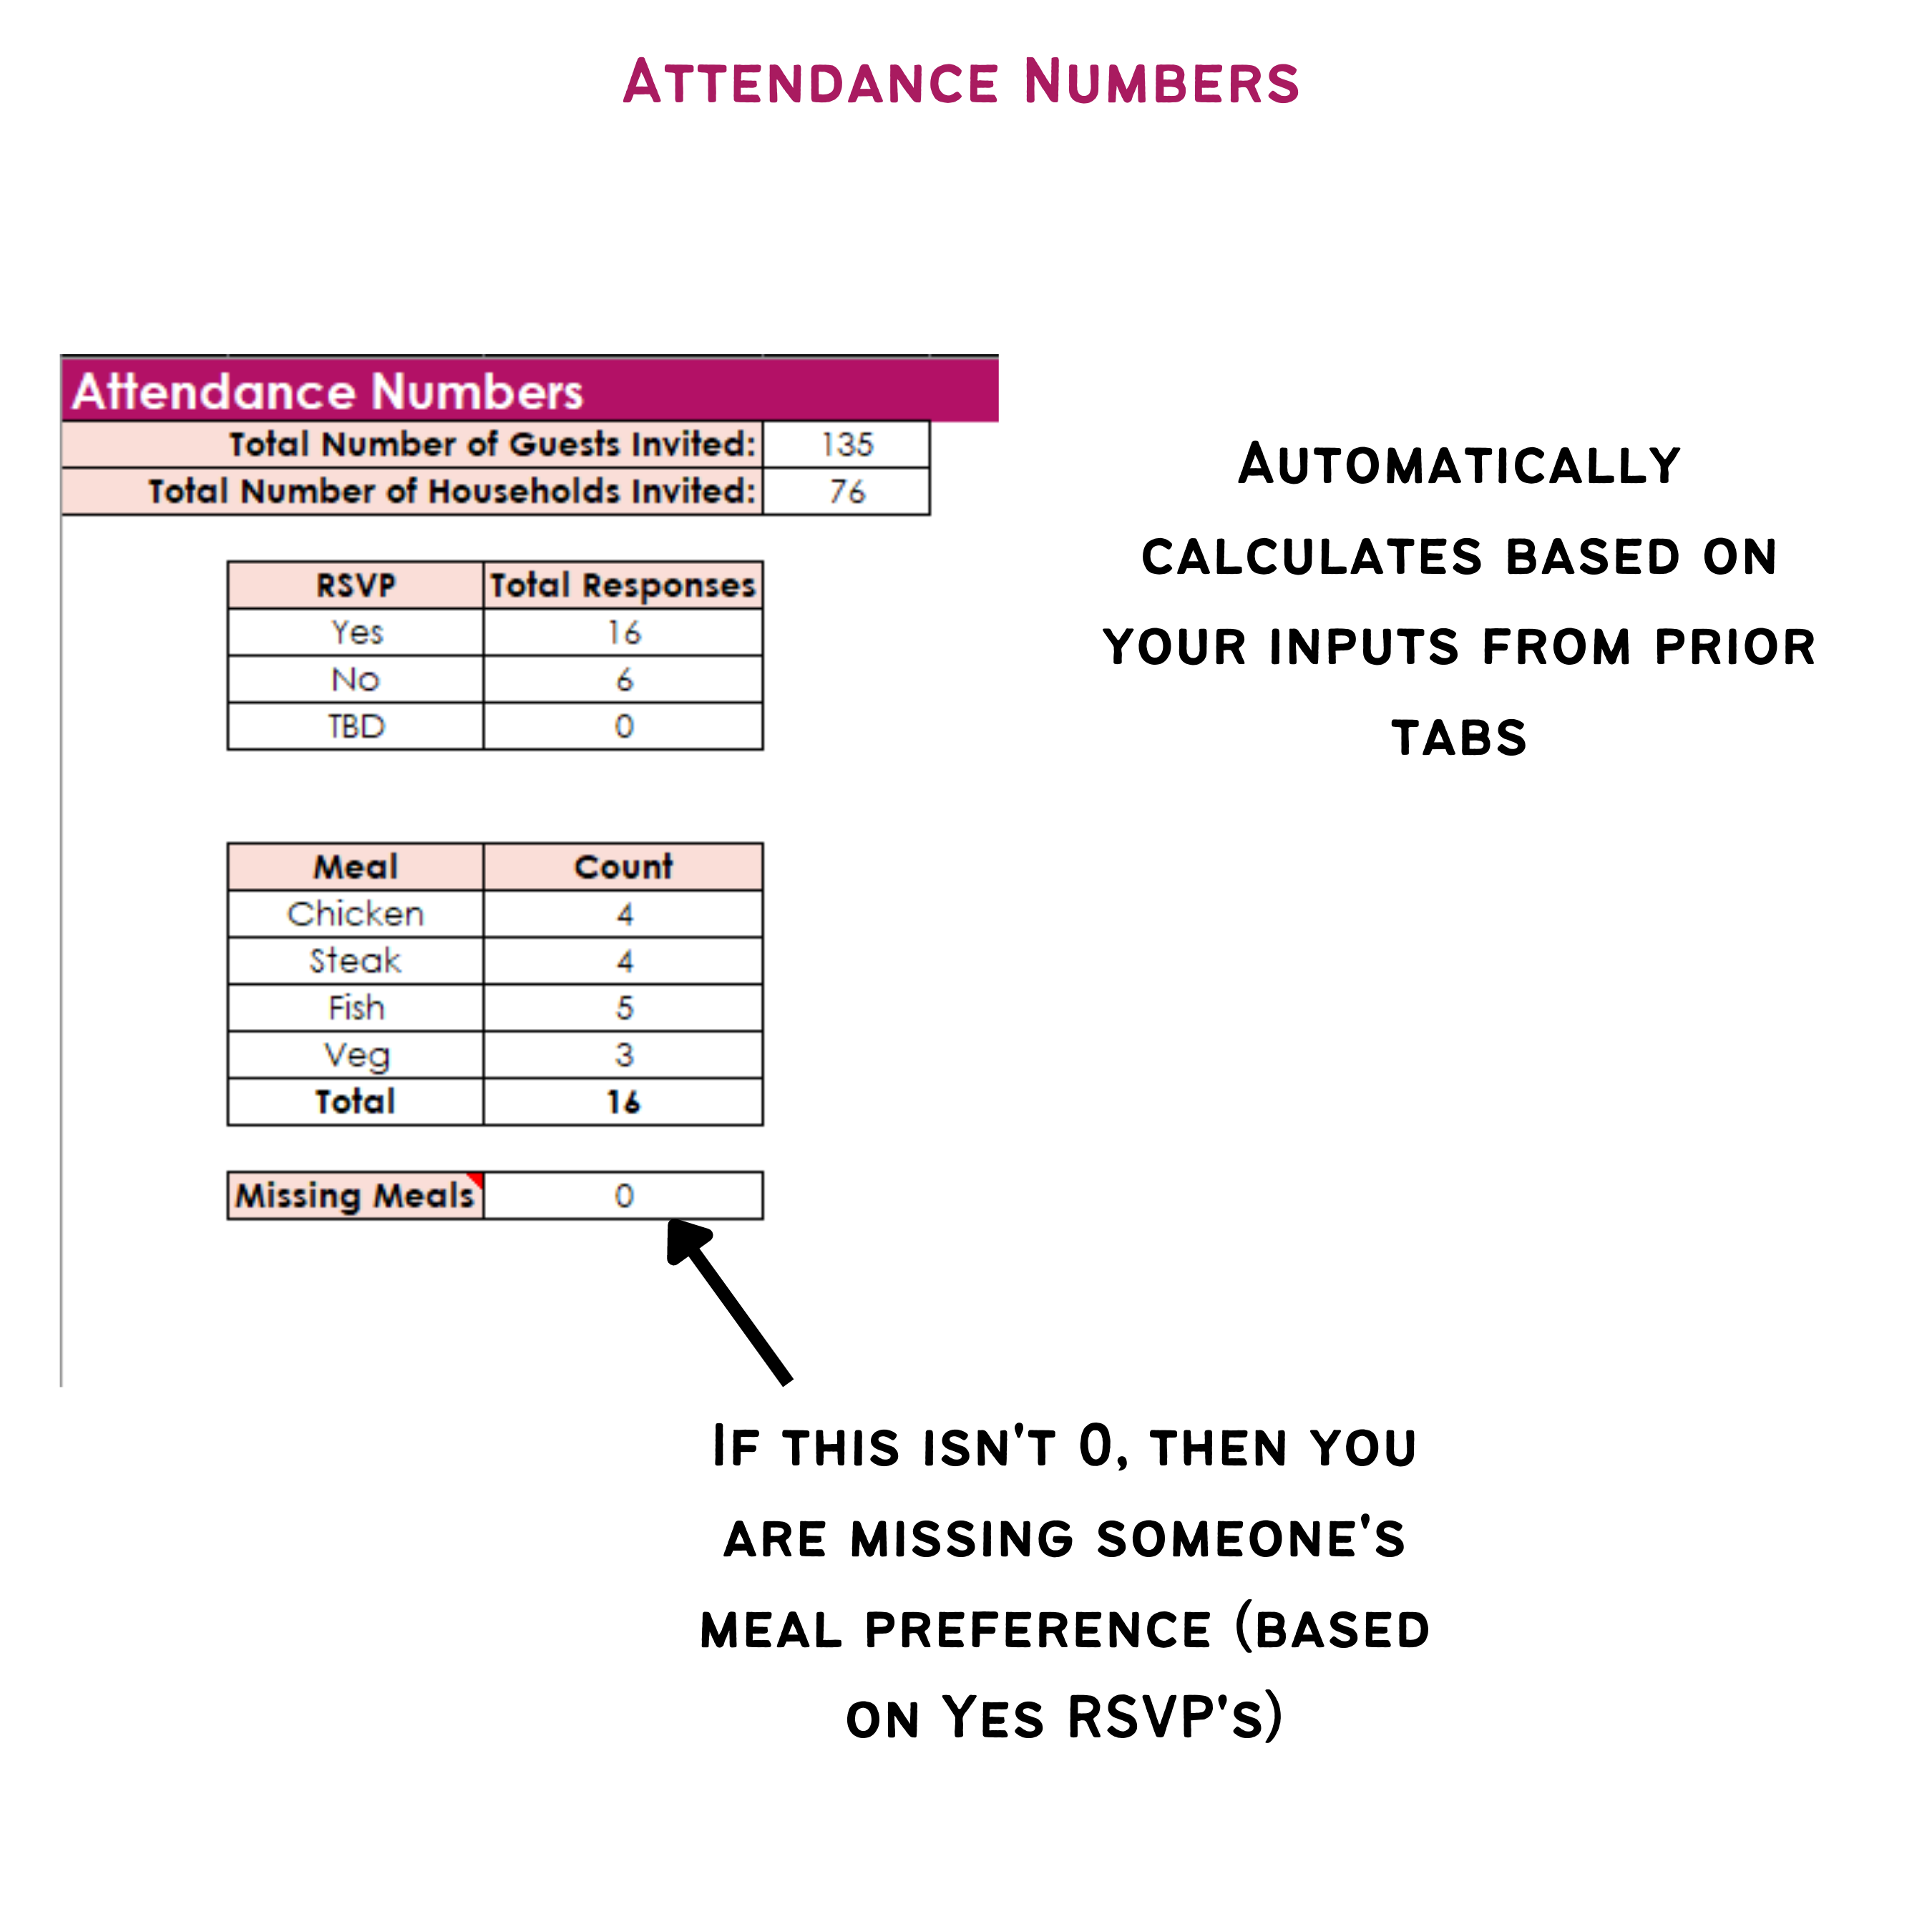 wedding guest list automatically calculated attendance numbers